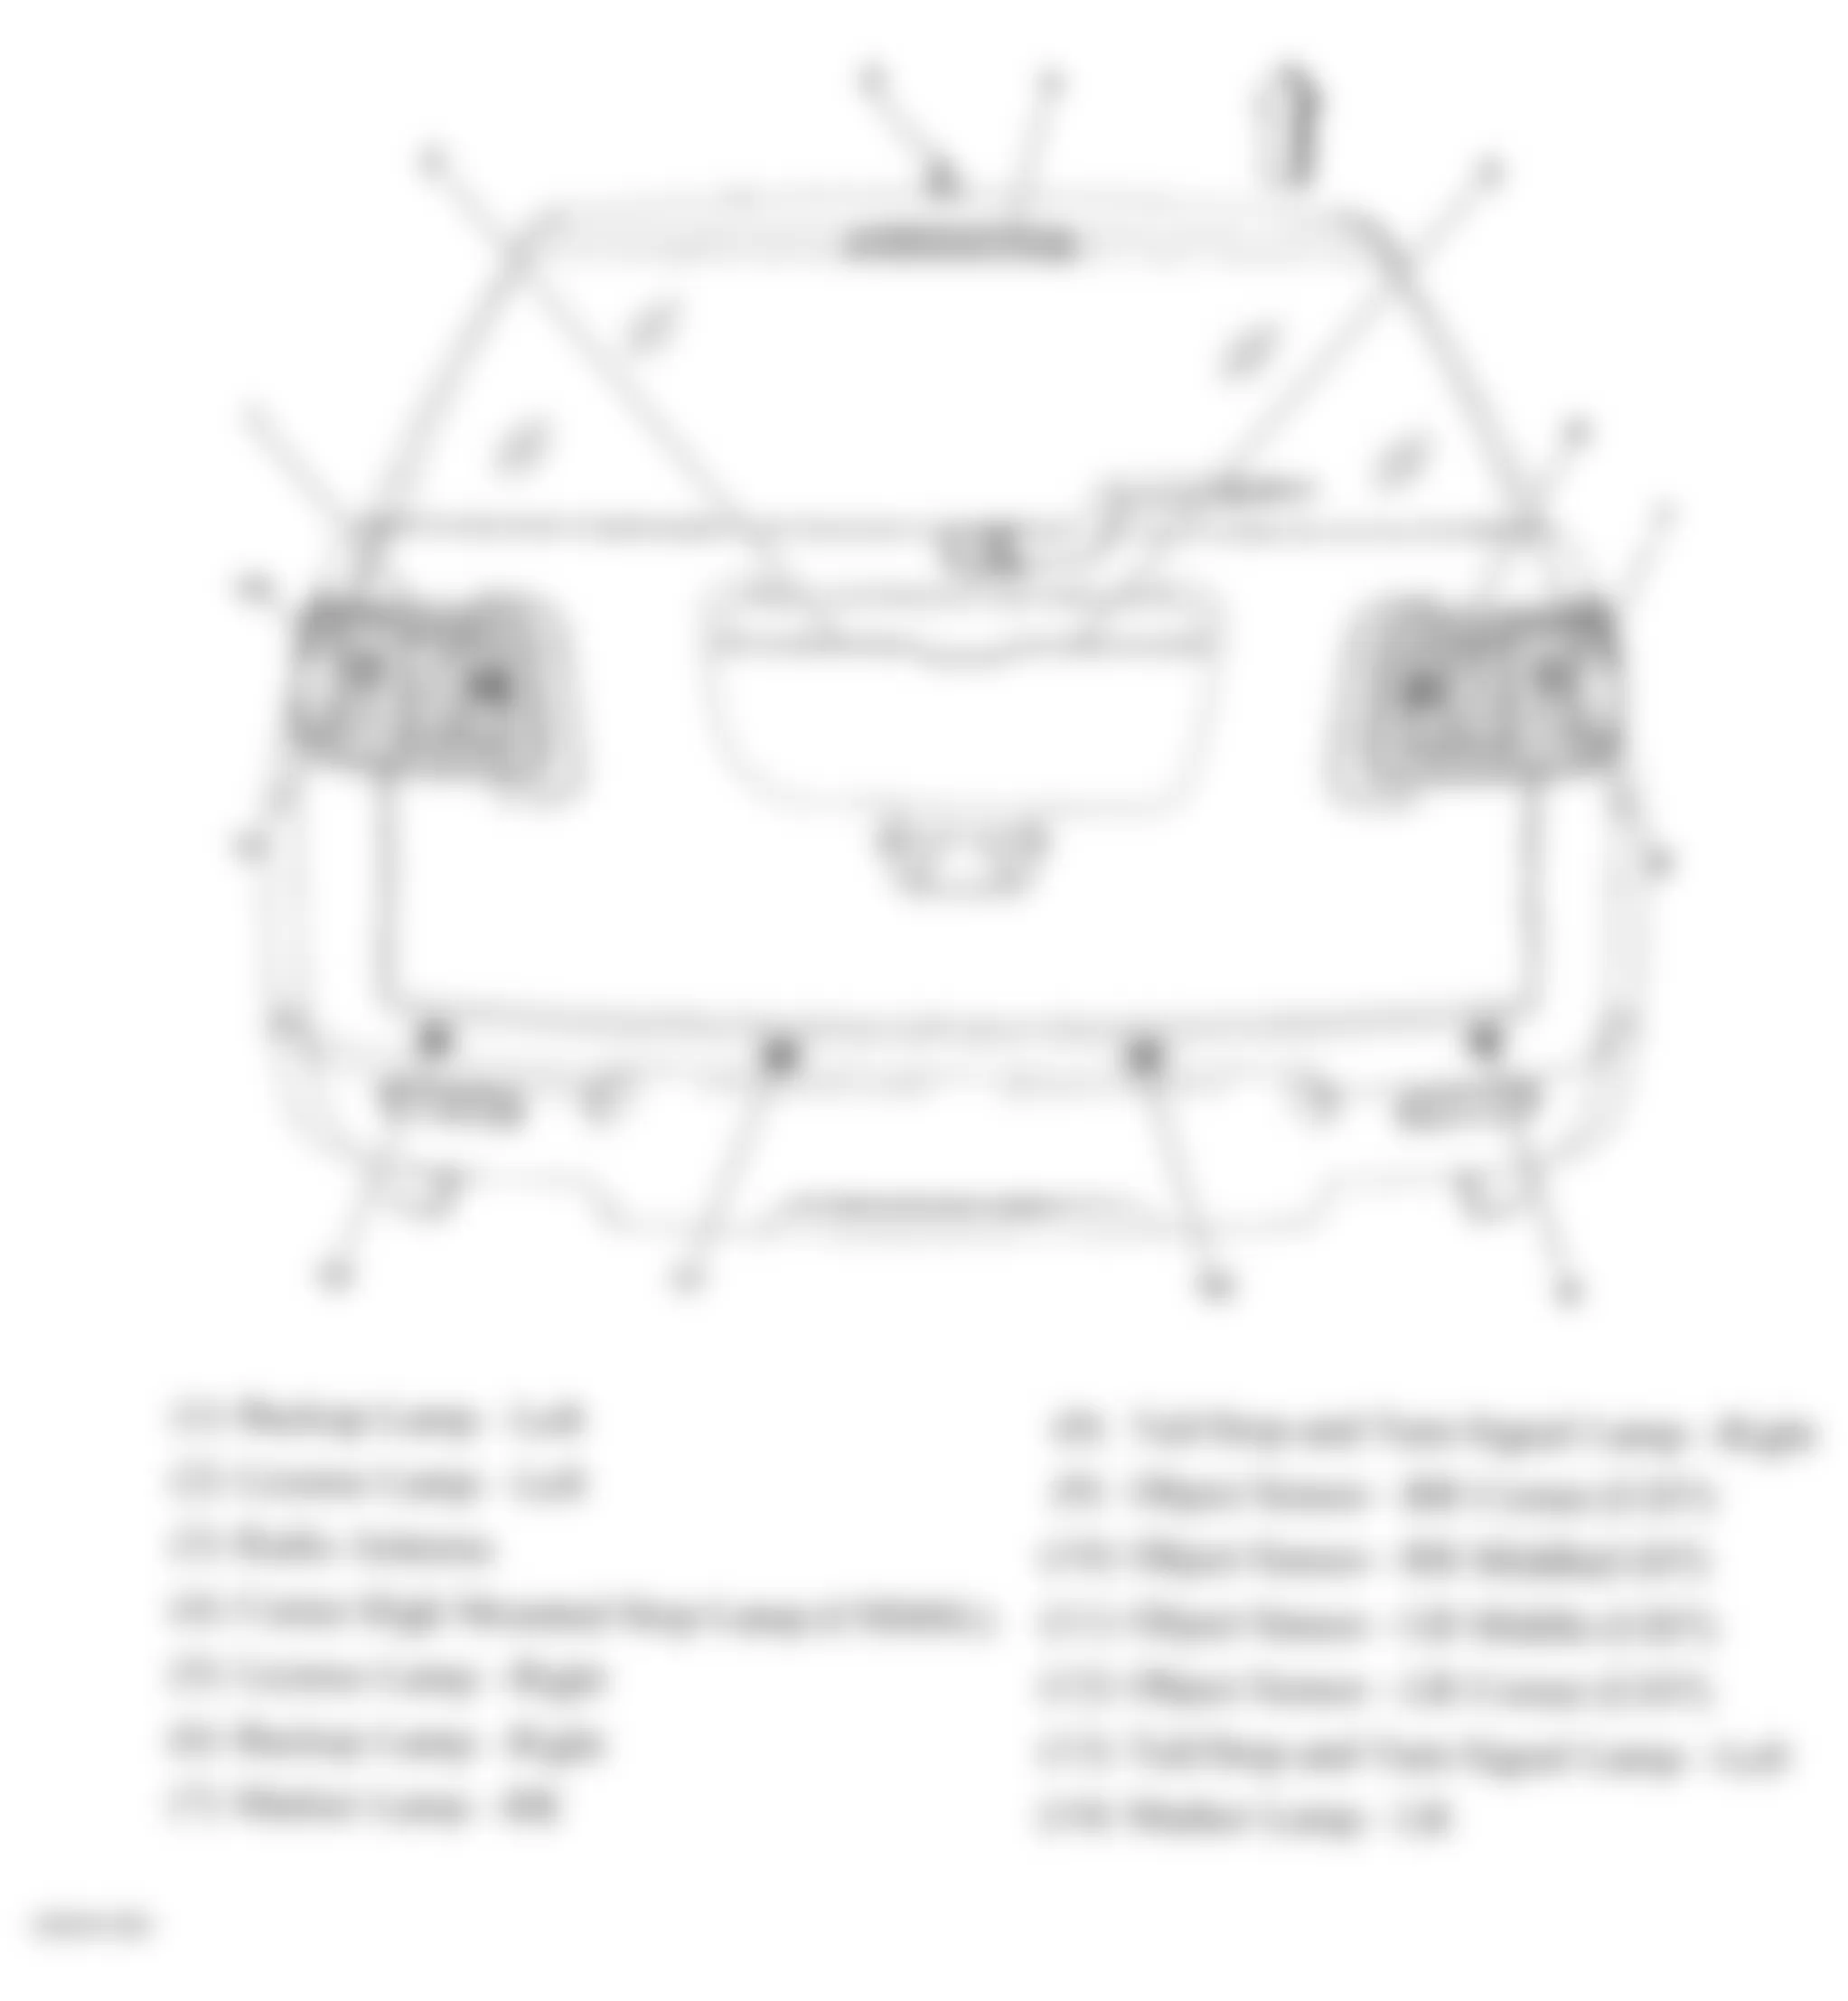 GMC Acadia SLE 2008 - Component Locations -  Rear Of Vehicle (Acadia & Outlook)